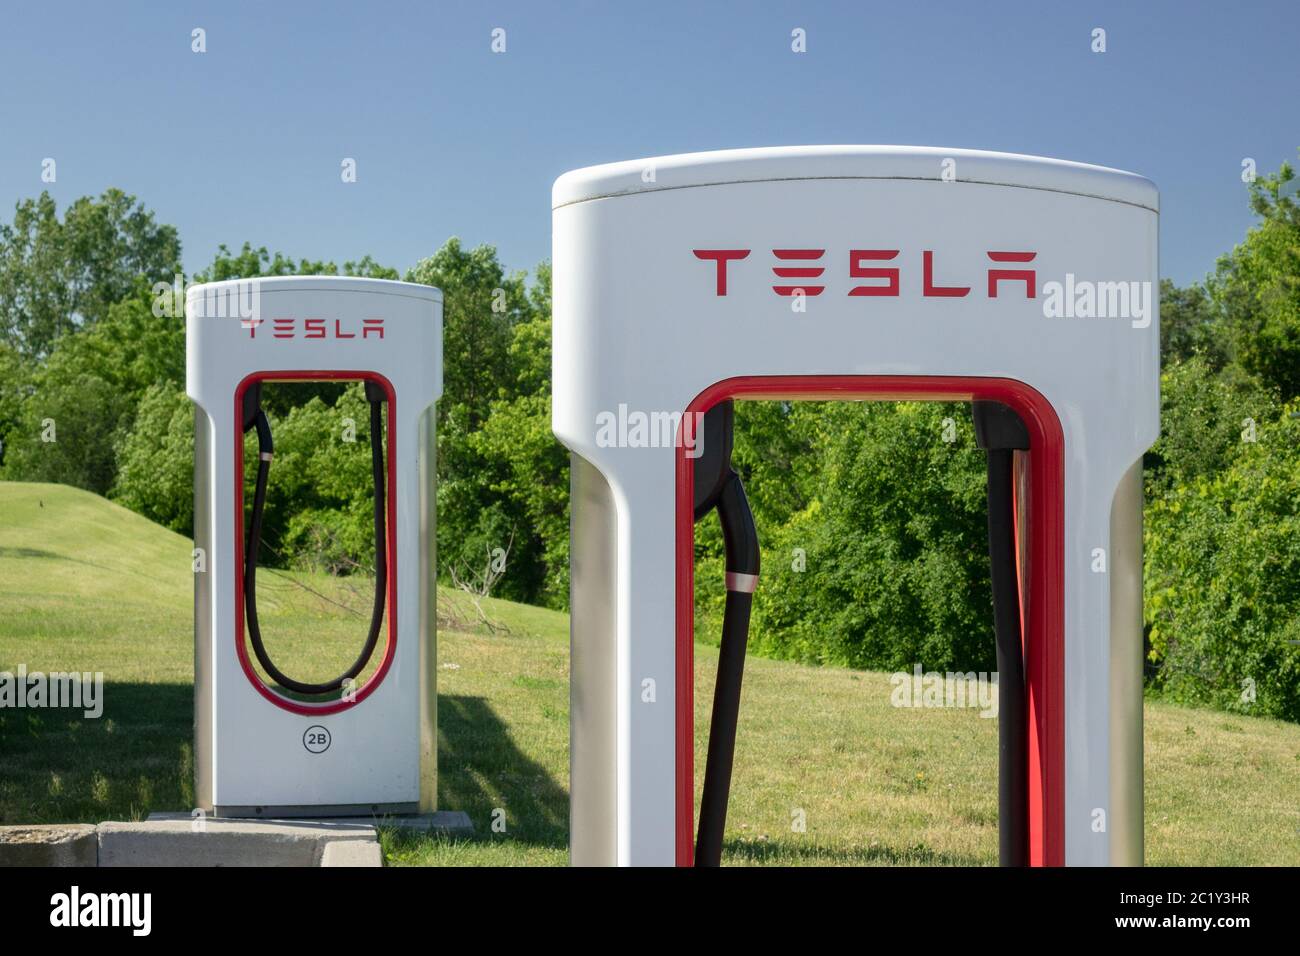 Tesla Electric Car Charging Station Supercharging Network Canada Stock Photo